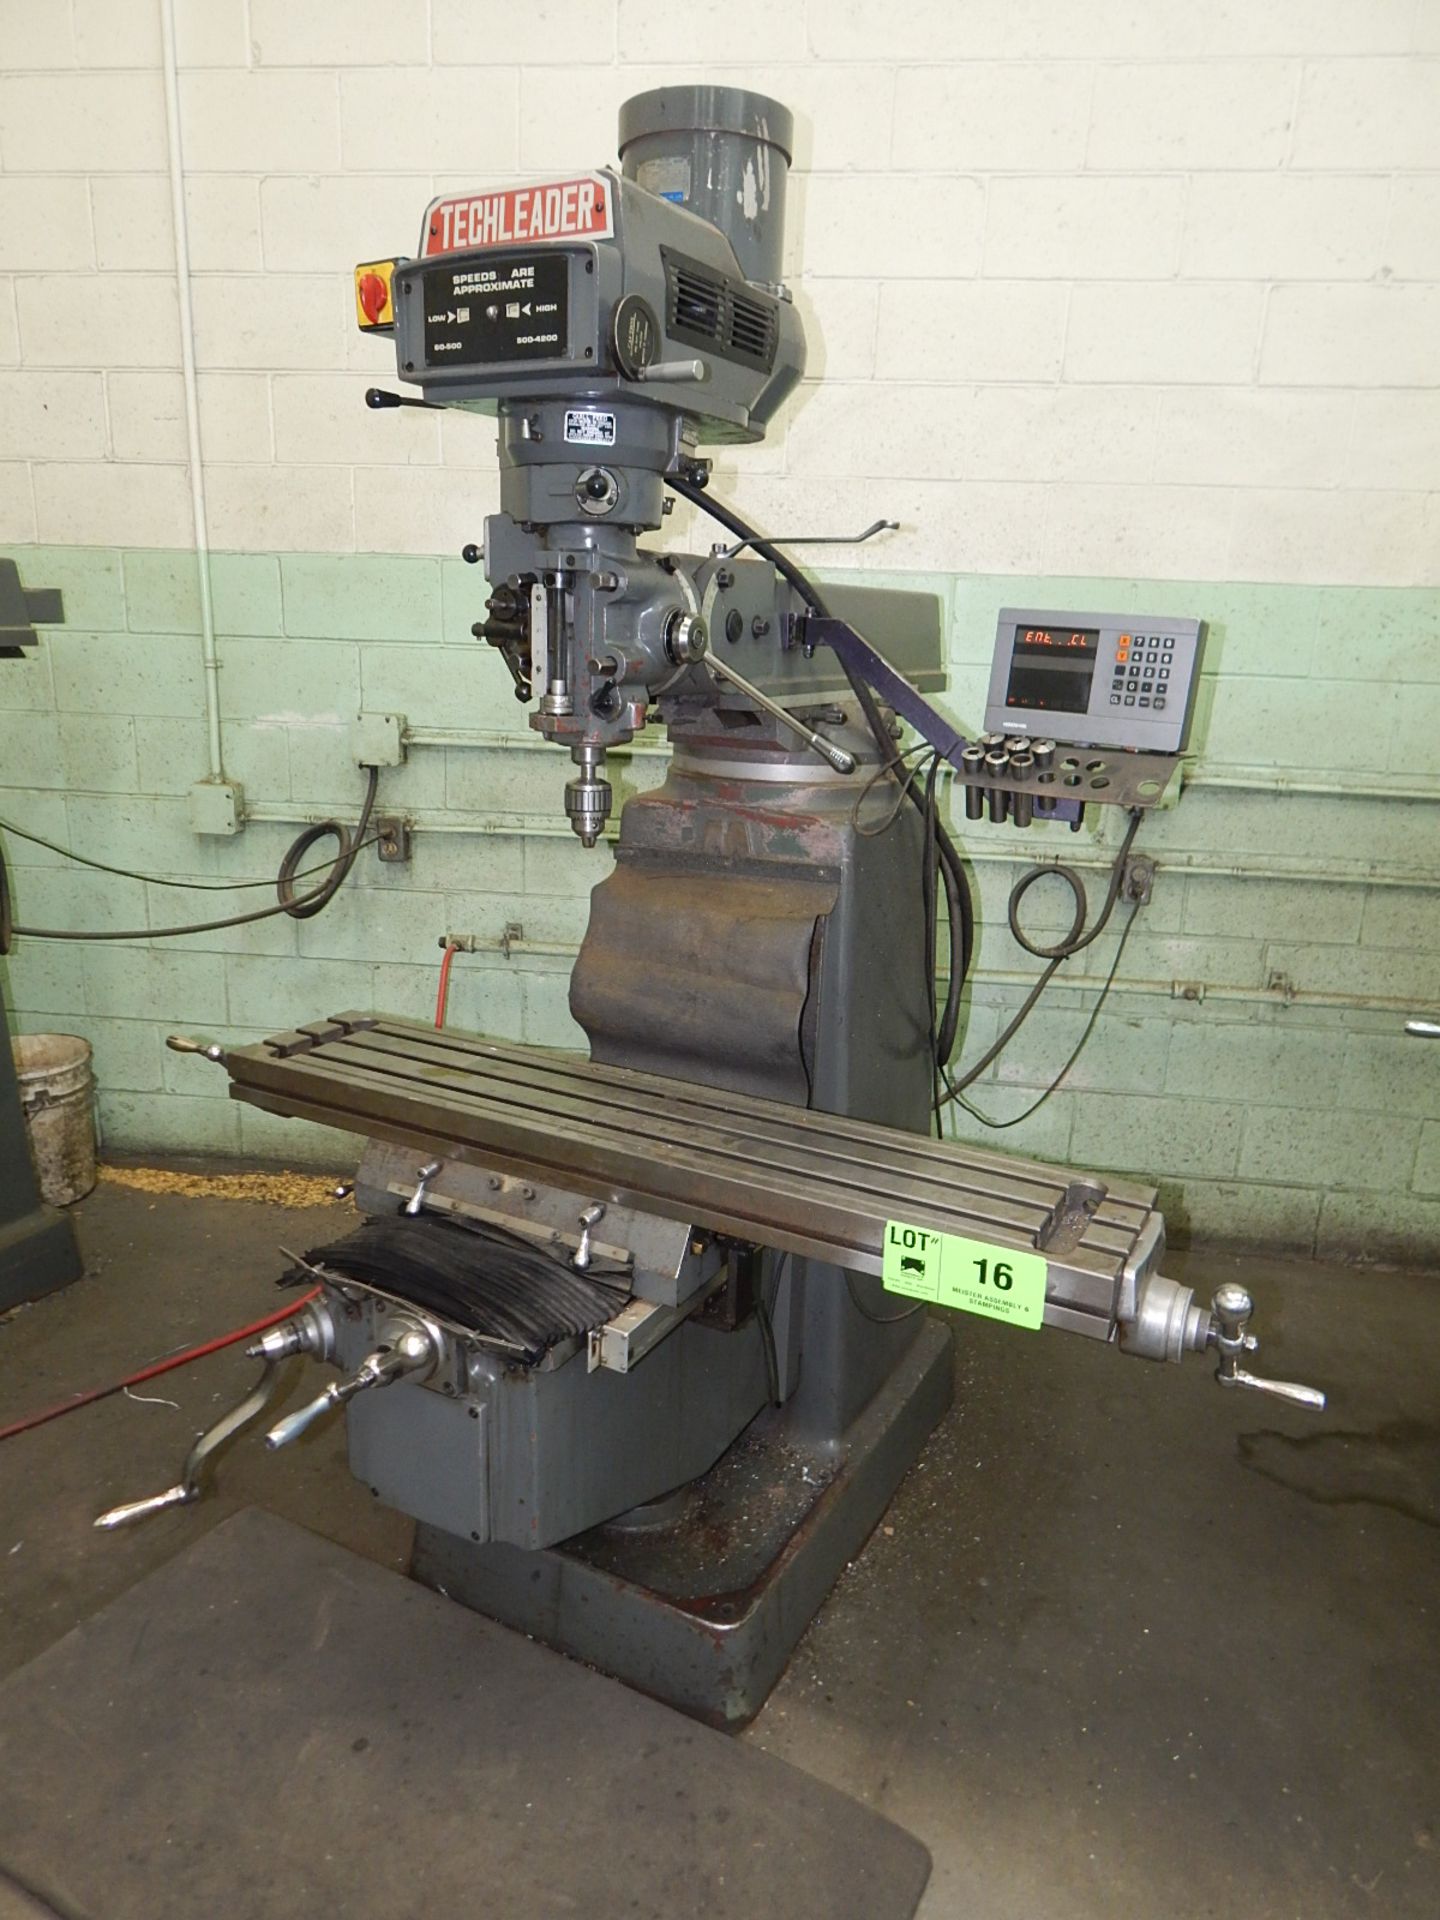 TECH LEADER (1996) 3VHR TURRET MILL WITH HEIDENHAIN 2 AXIS DRO, 10" X 50" T-SLOT TABLE, SPEEDS TO